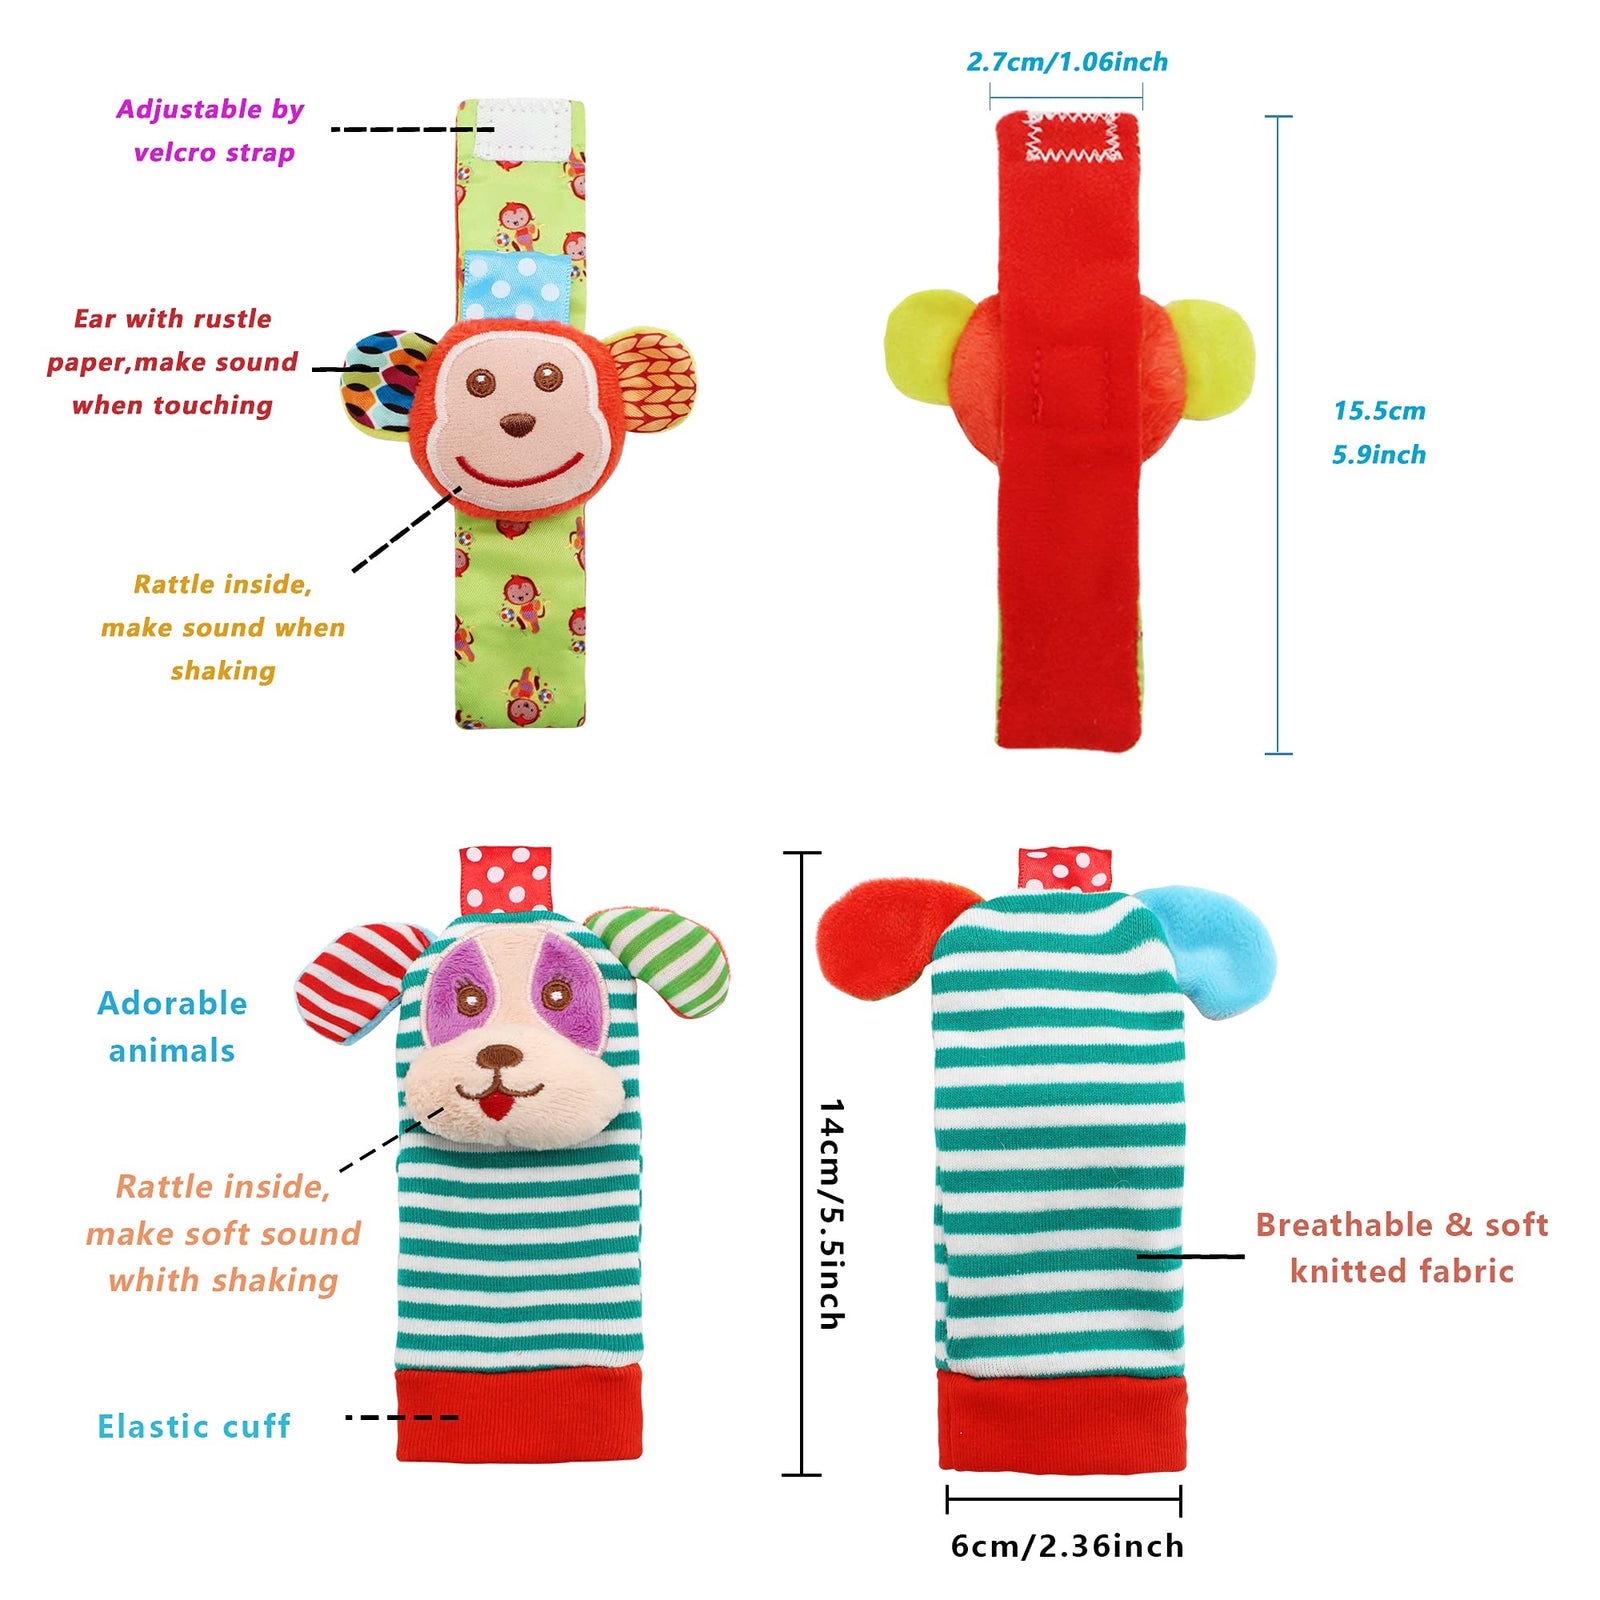 SSK Soft Baby Wrist Rattle Foot Finder Socks Set,Cotton and Plush Stuffed Infant Toys,Birthday Holiday Birth Present for Newborn Boy Girl 0/3/4/6/7/8/9/12/18 Months Kids Toddler,4 Cute Animals